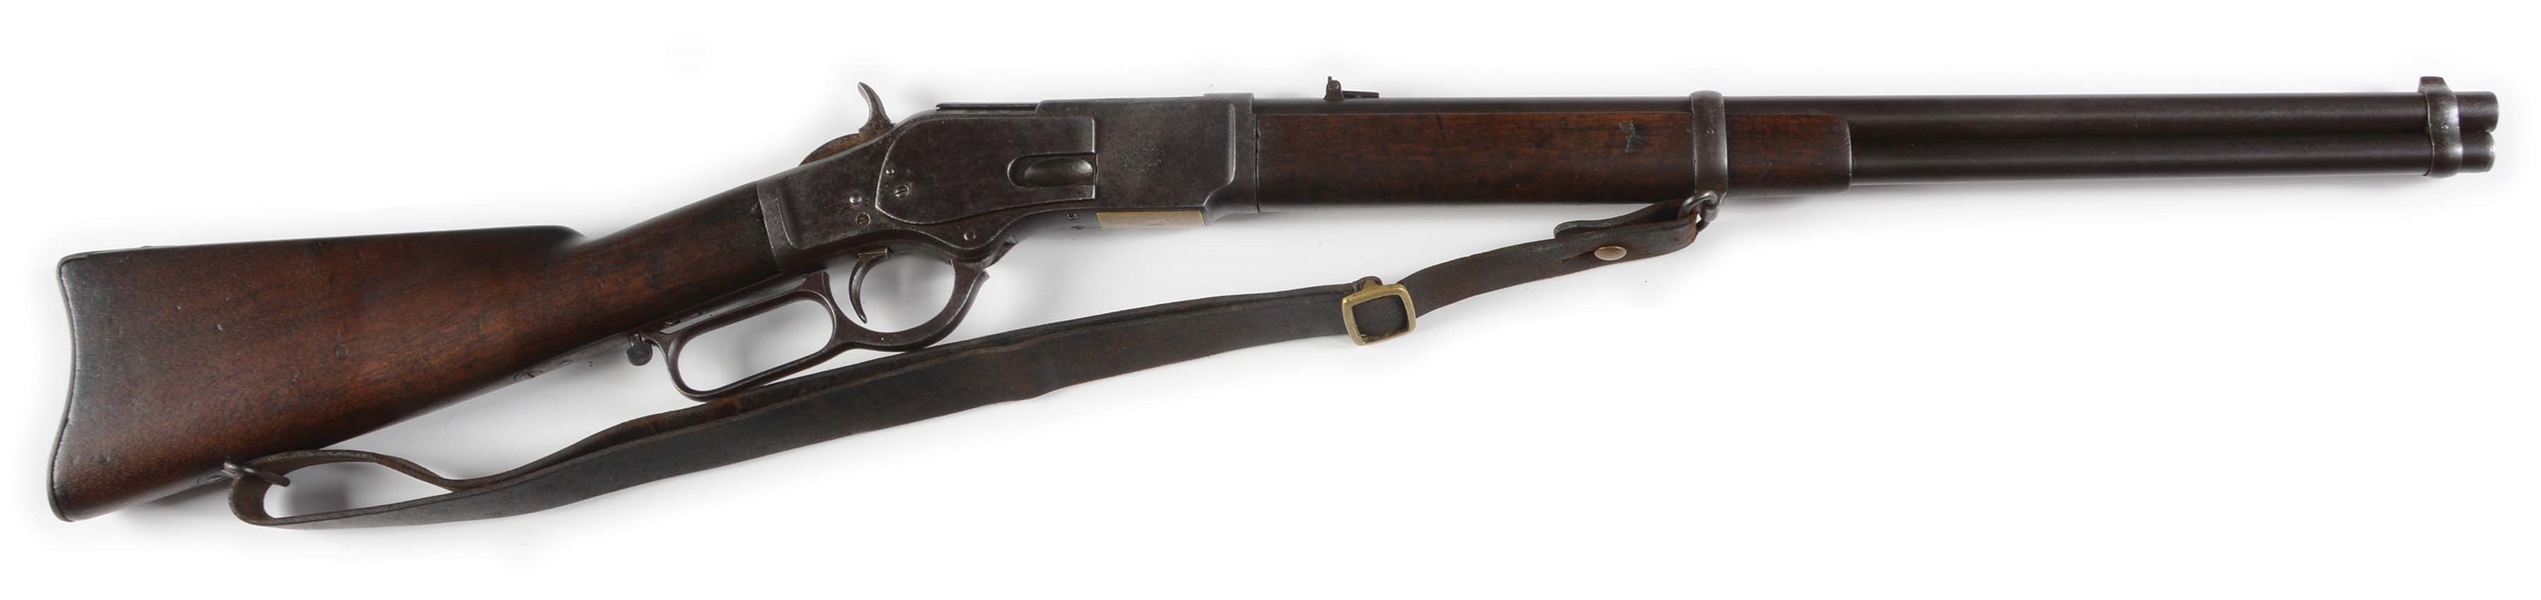 (A) FOREIGN COPY OF A WINCHESTER 1873 FIRST MODEL WITH BRASS NAME PLATE NEAR BUTT.